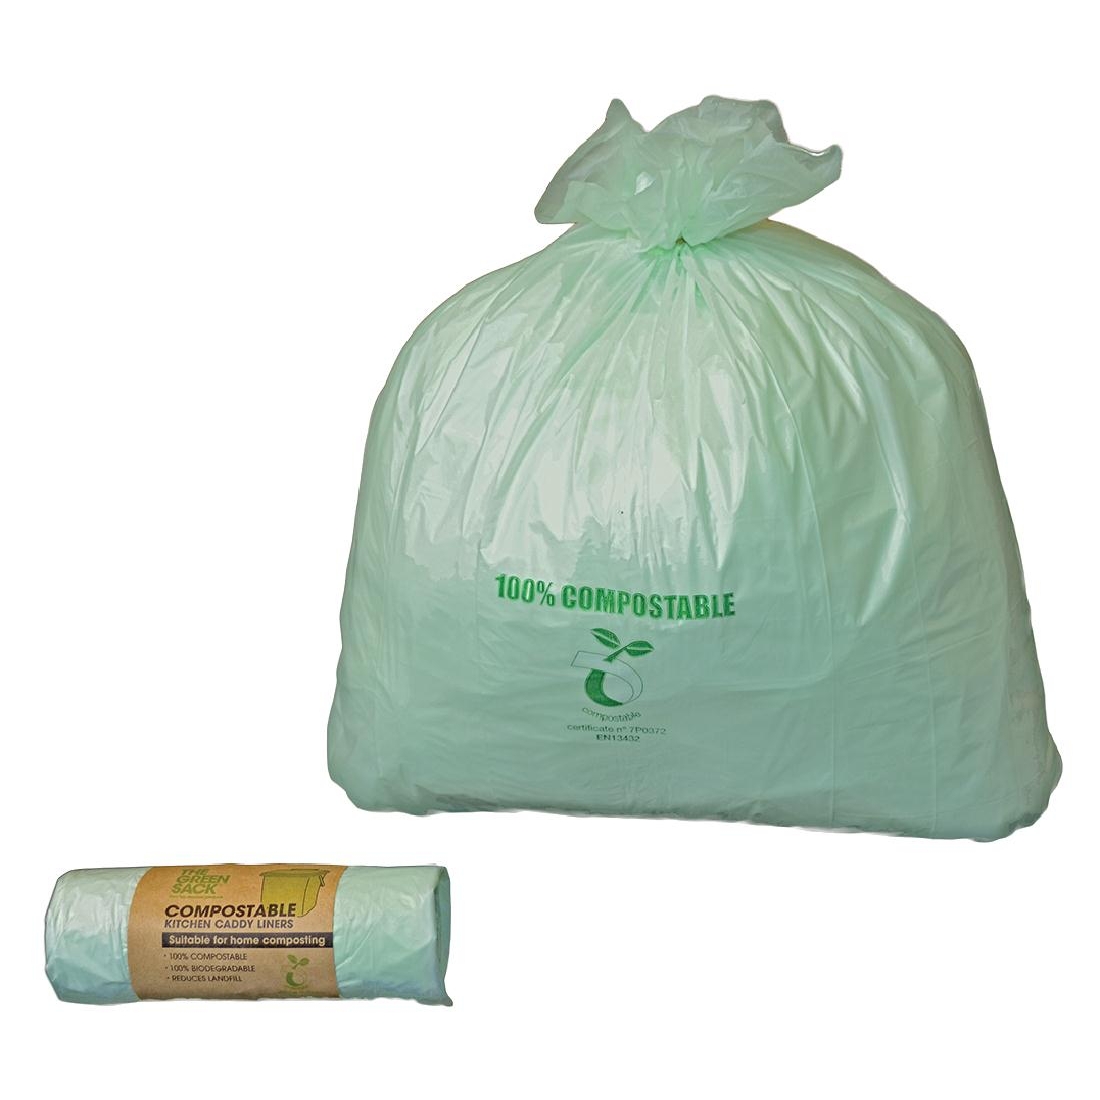 Jantex Small Compostable Caddy Sack 10 Litre Pack of 24